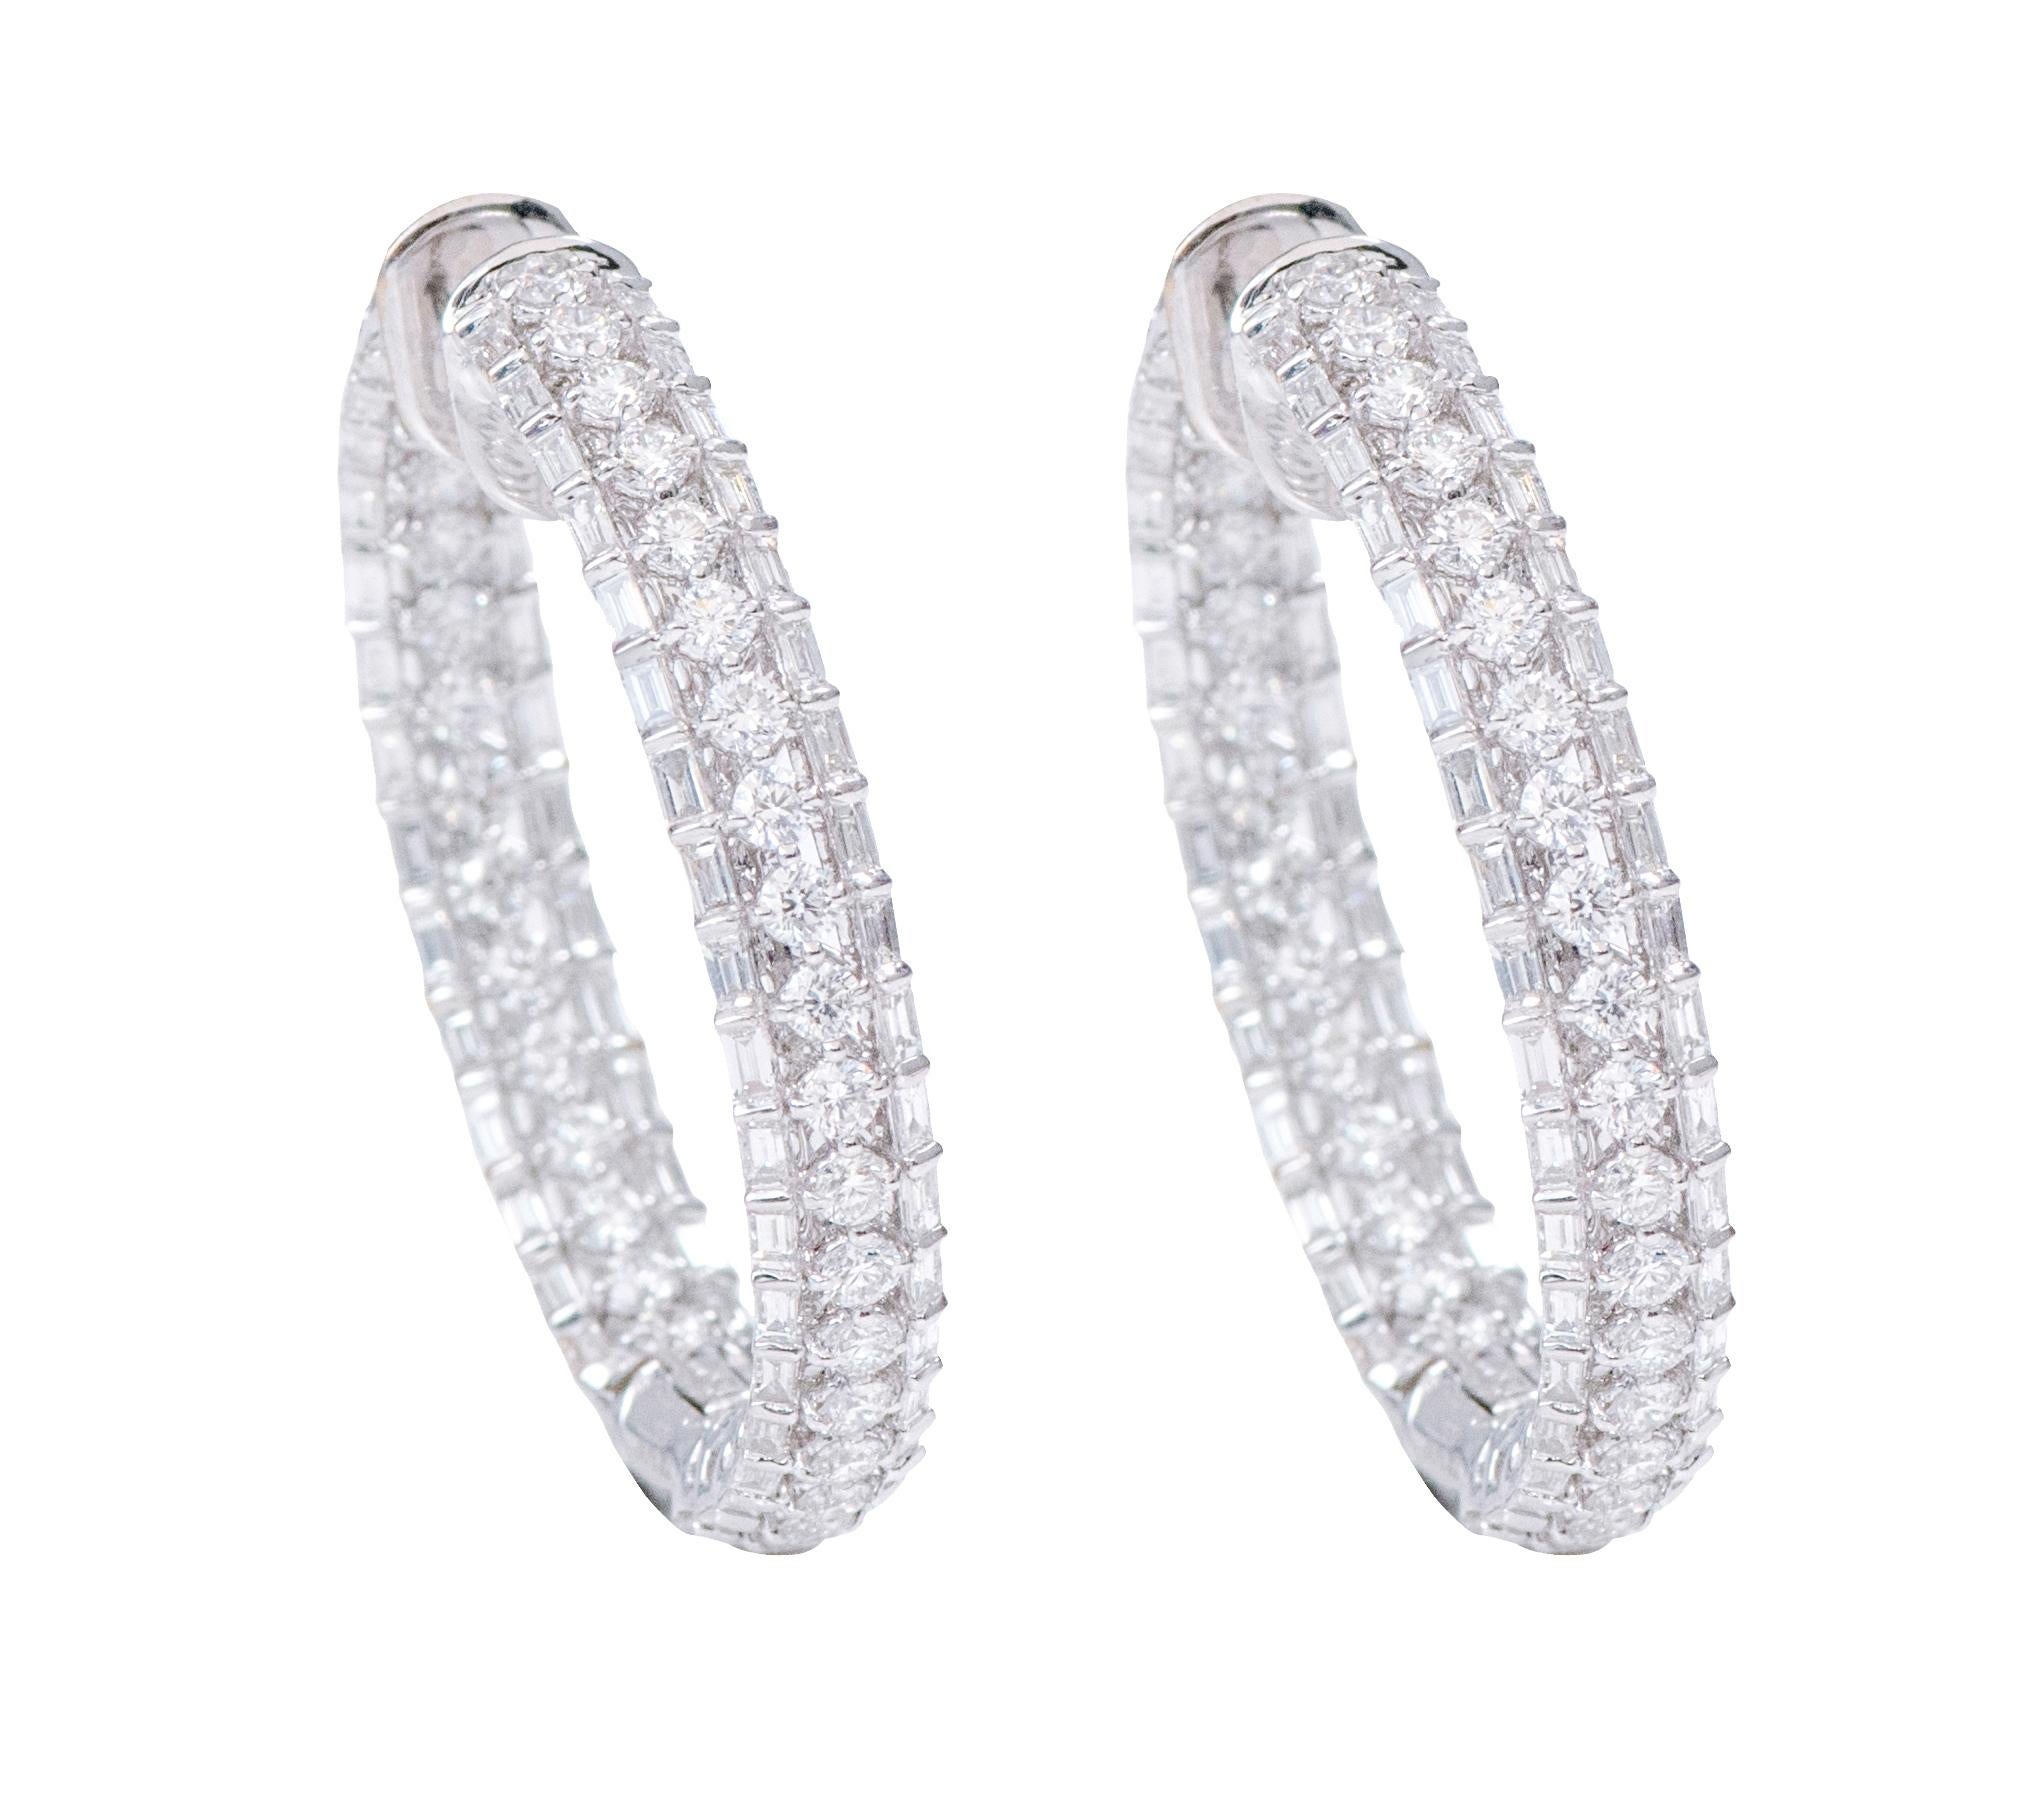 18 Karat White Gold 4.96 Carats Diamond Hoop Earrings

This adorable and fashionable triple-layer hoop earring with the combination of prong set brilliant round diamonds covered by the closed set baguette side diamonds both inside and outside is an